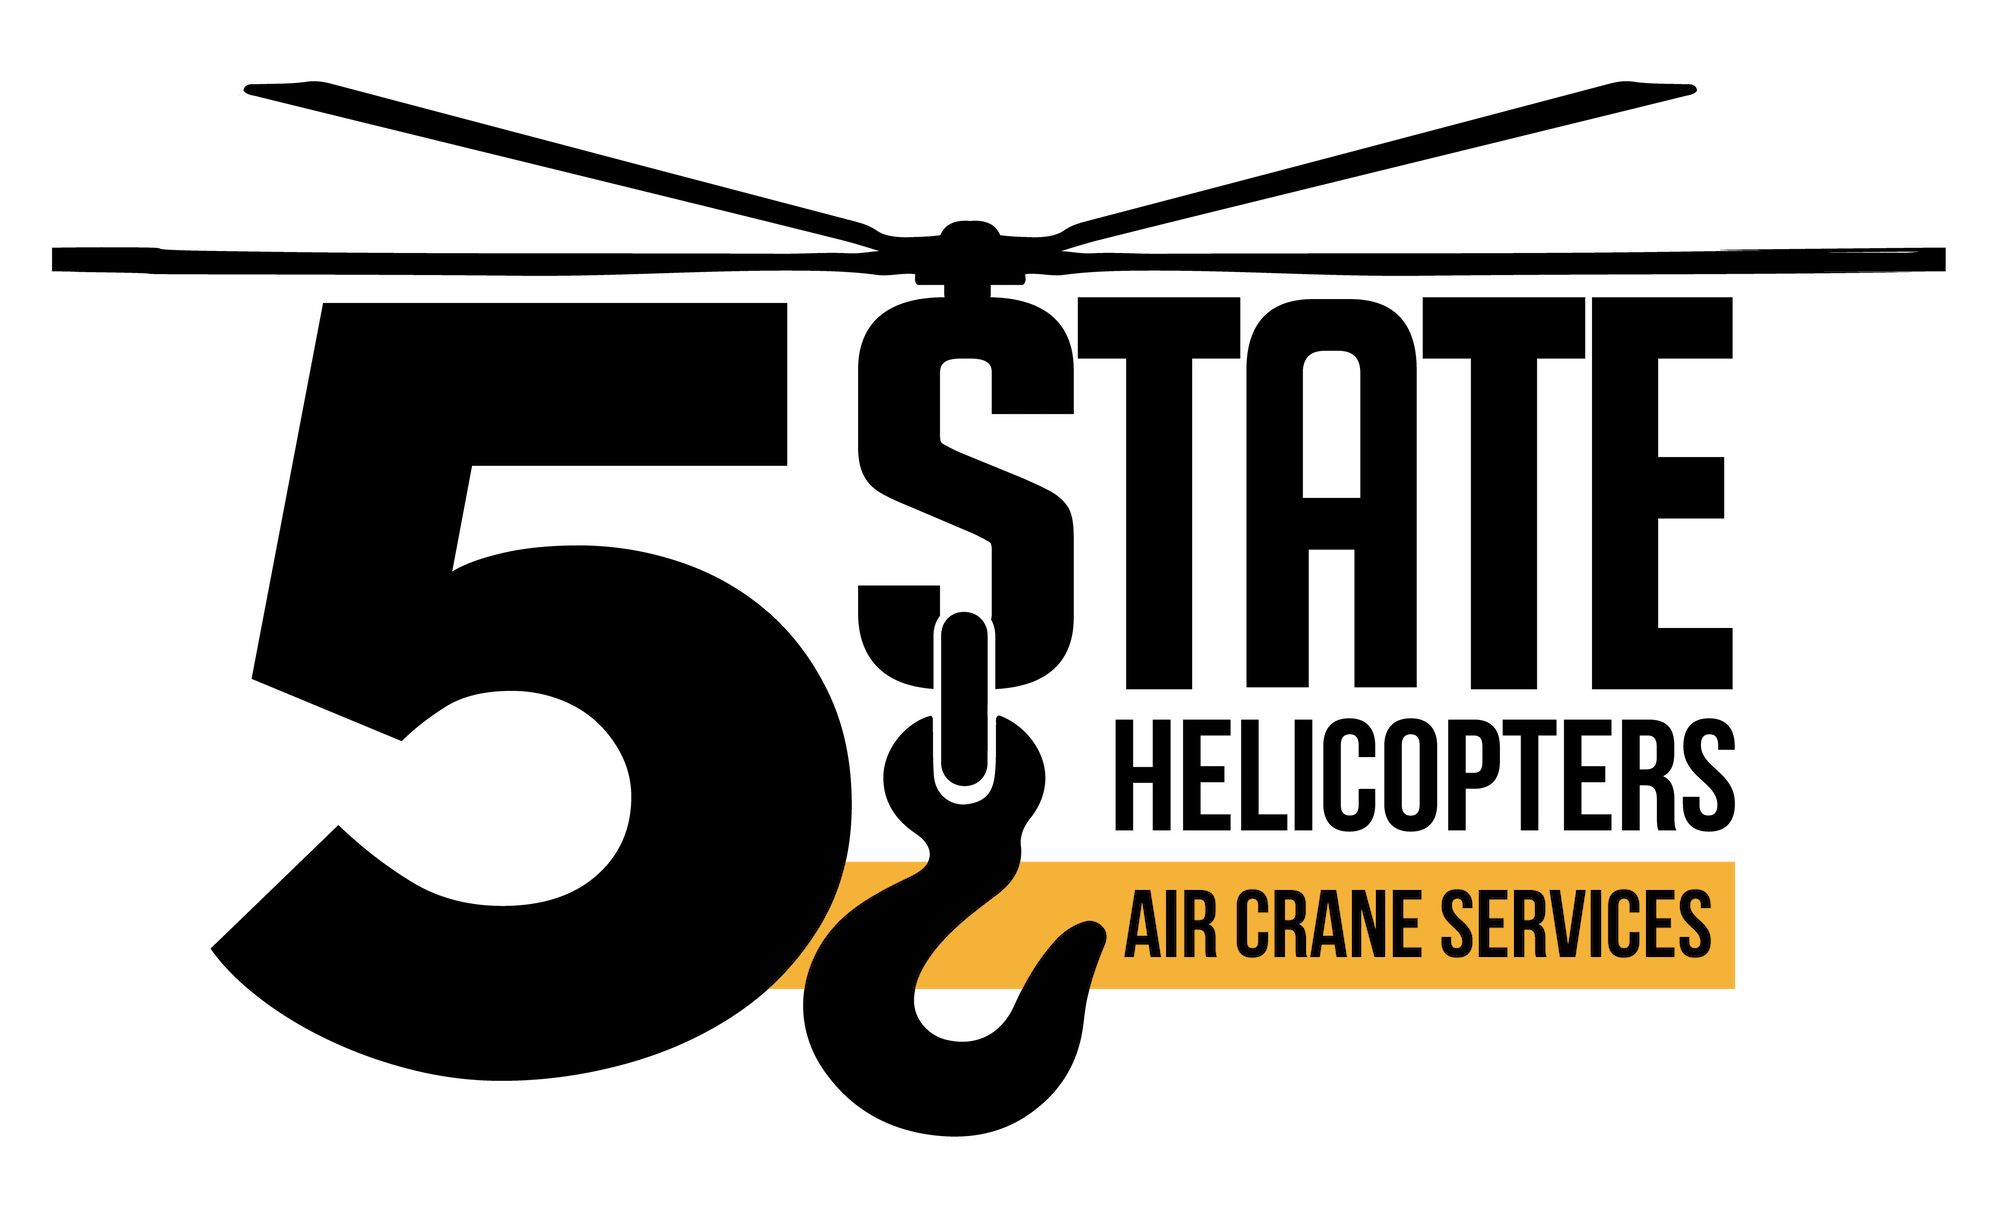 5 STATE HELICOPTERS AERIAL CRANE SERVICE